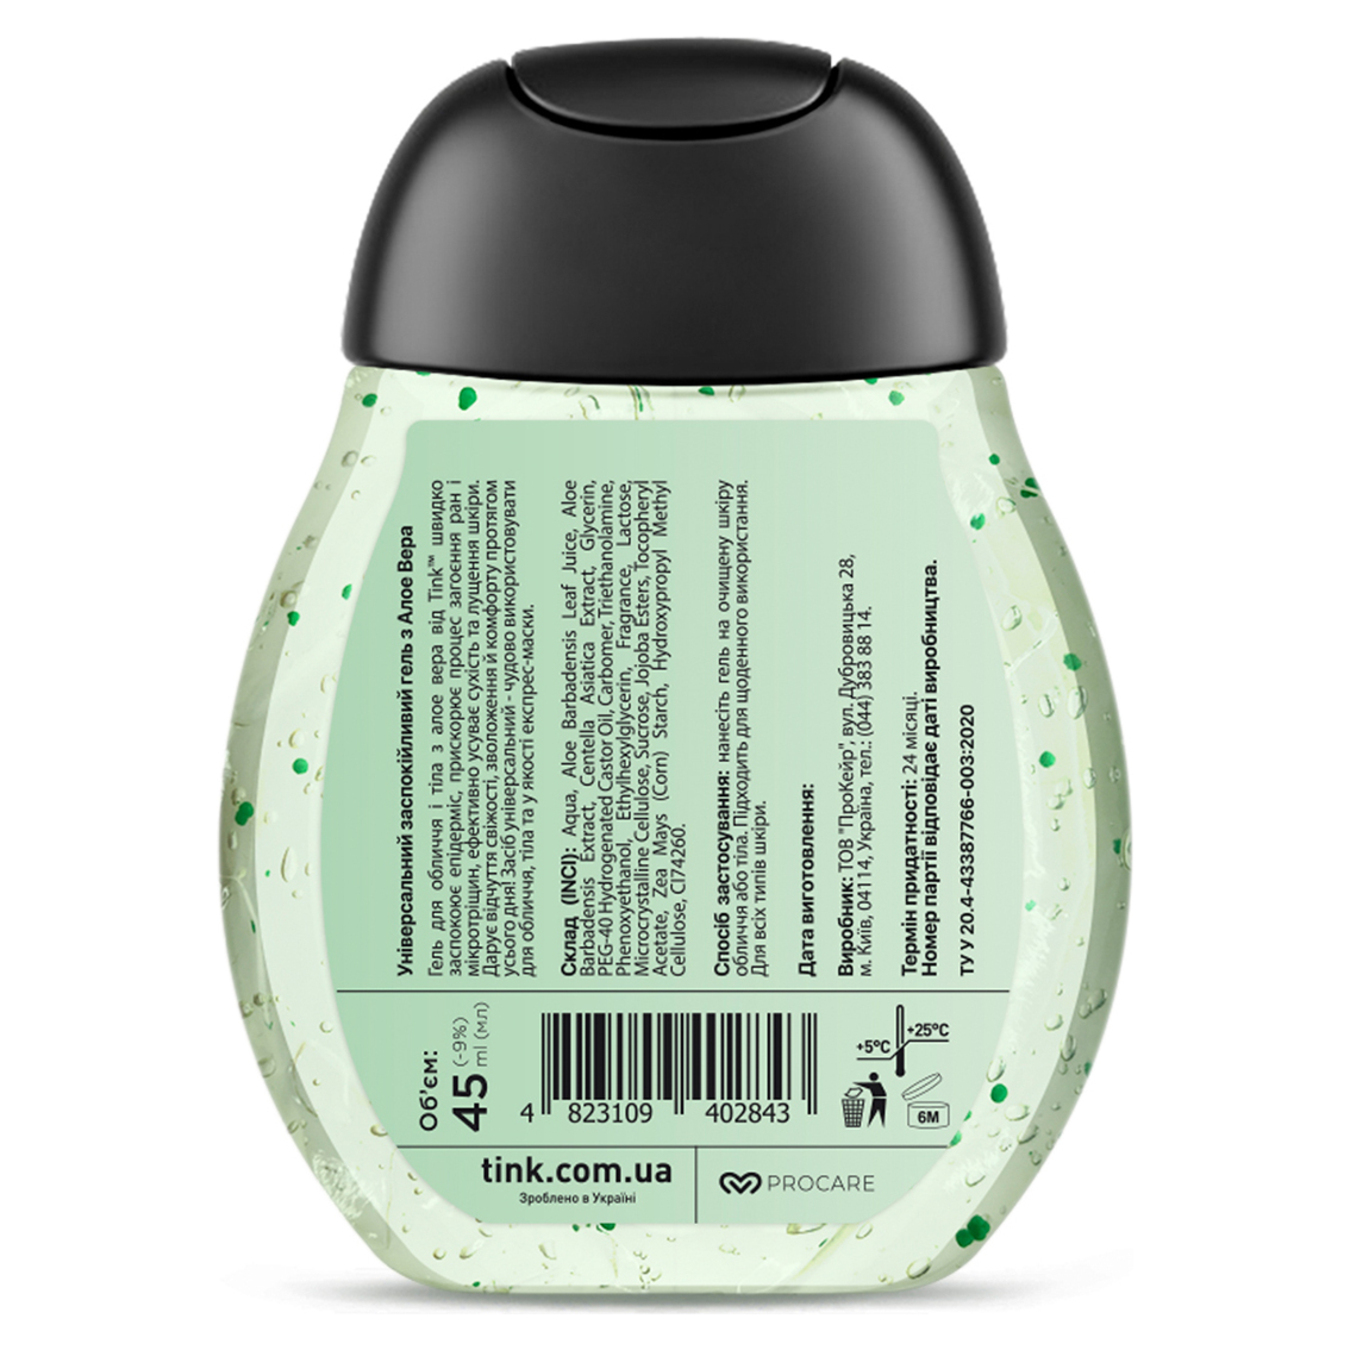 Tink soothing face and body gel with aloe 45ml 2